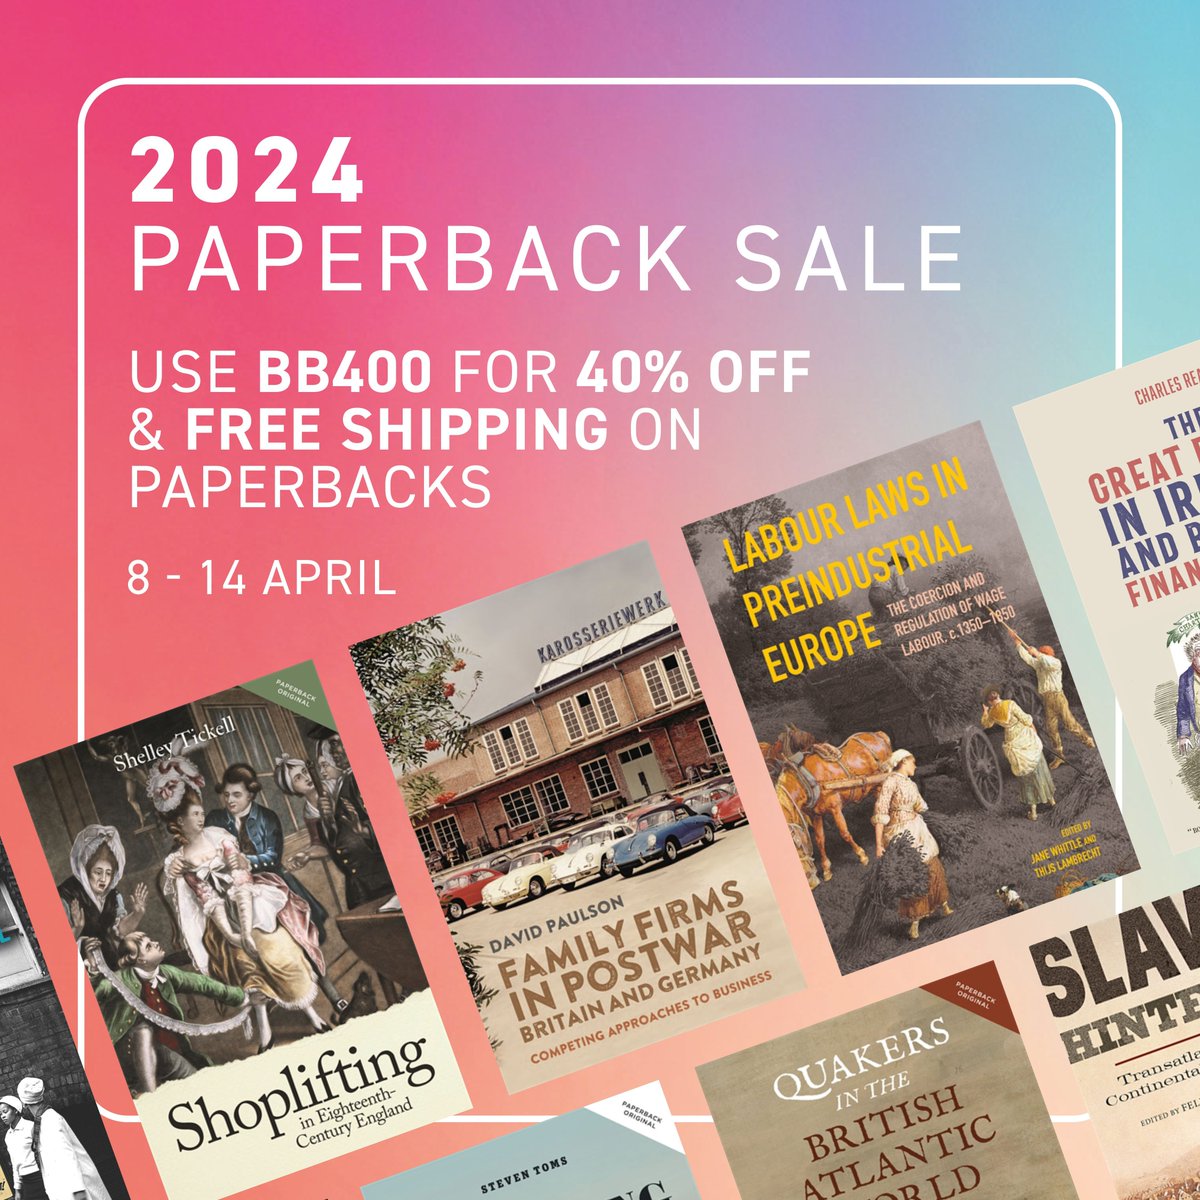 Save 40% and get free shipping on these titles in the series People, Markets, Goods, published in collaboration with the Economic History Society! Offer ends Sunday. buff.ly/3vpTP13 #BookSale #EconHist @EcHistSoc